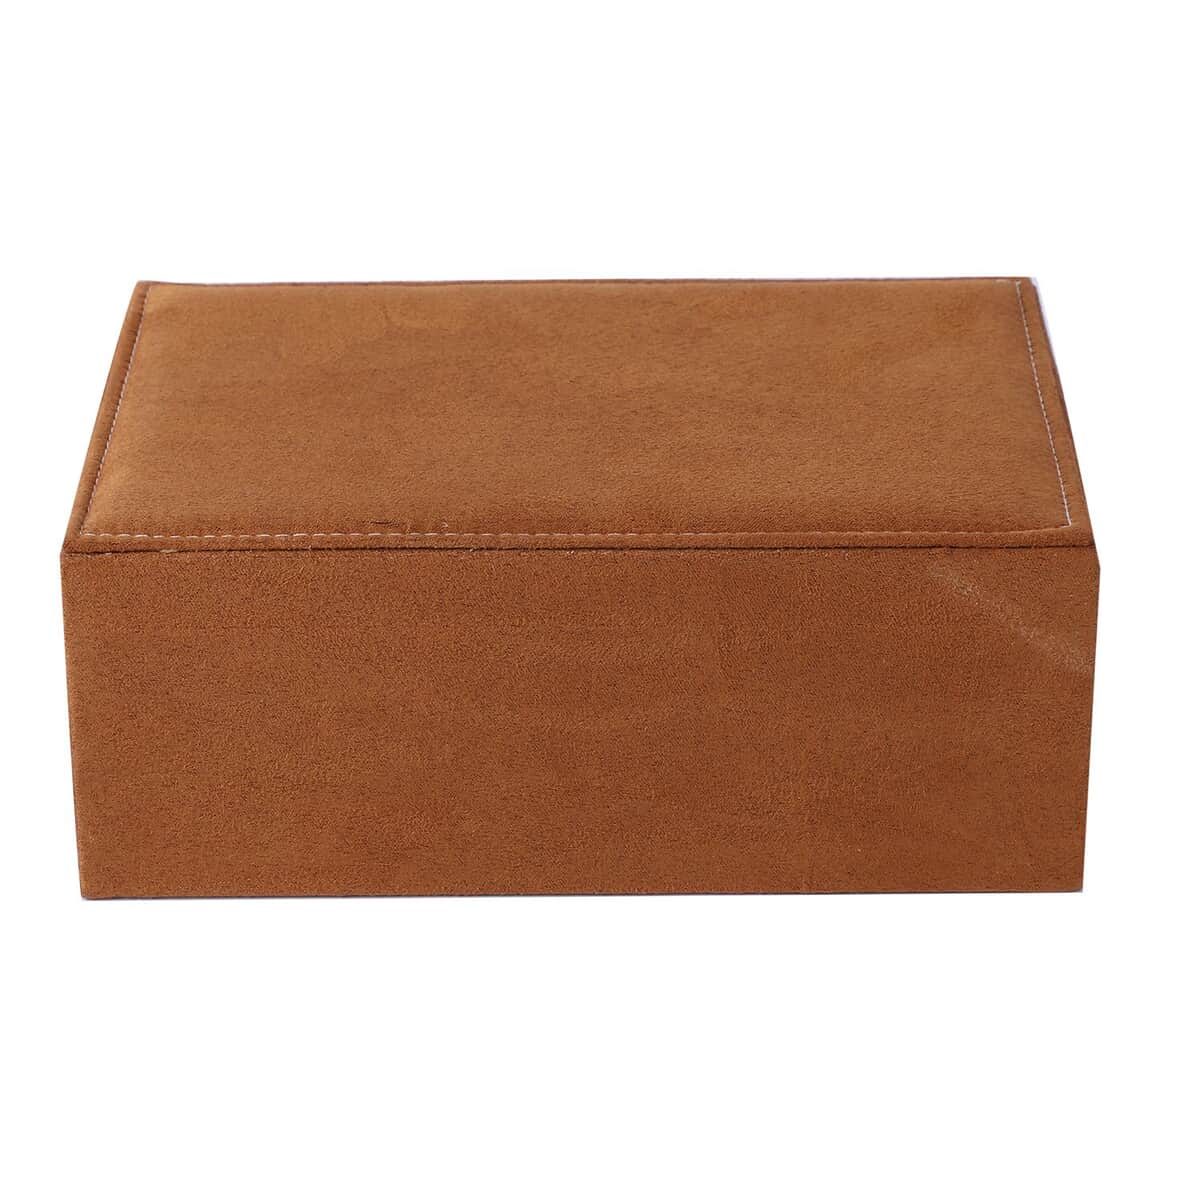 Tan Velvet 2 Layer Jewelry Box with Lock and Key image number 2